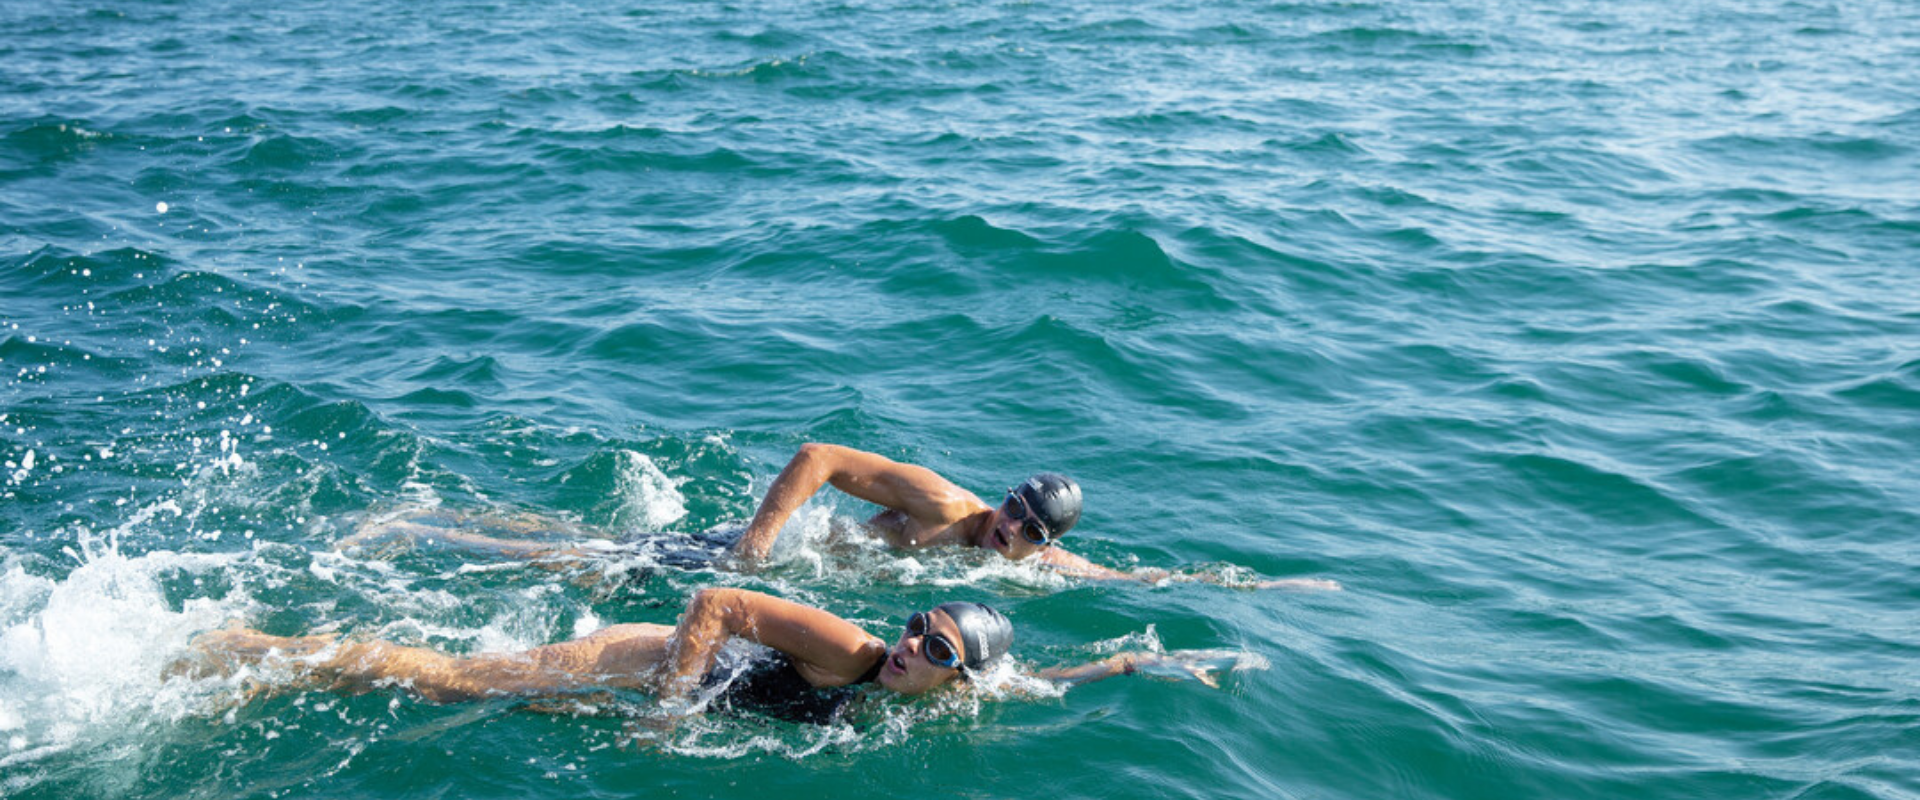 Our top tips for getting started ocean swimming